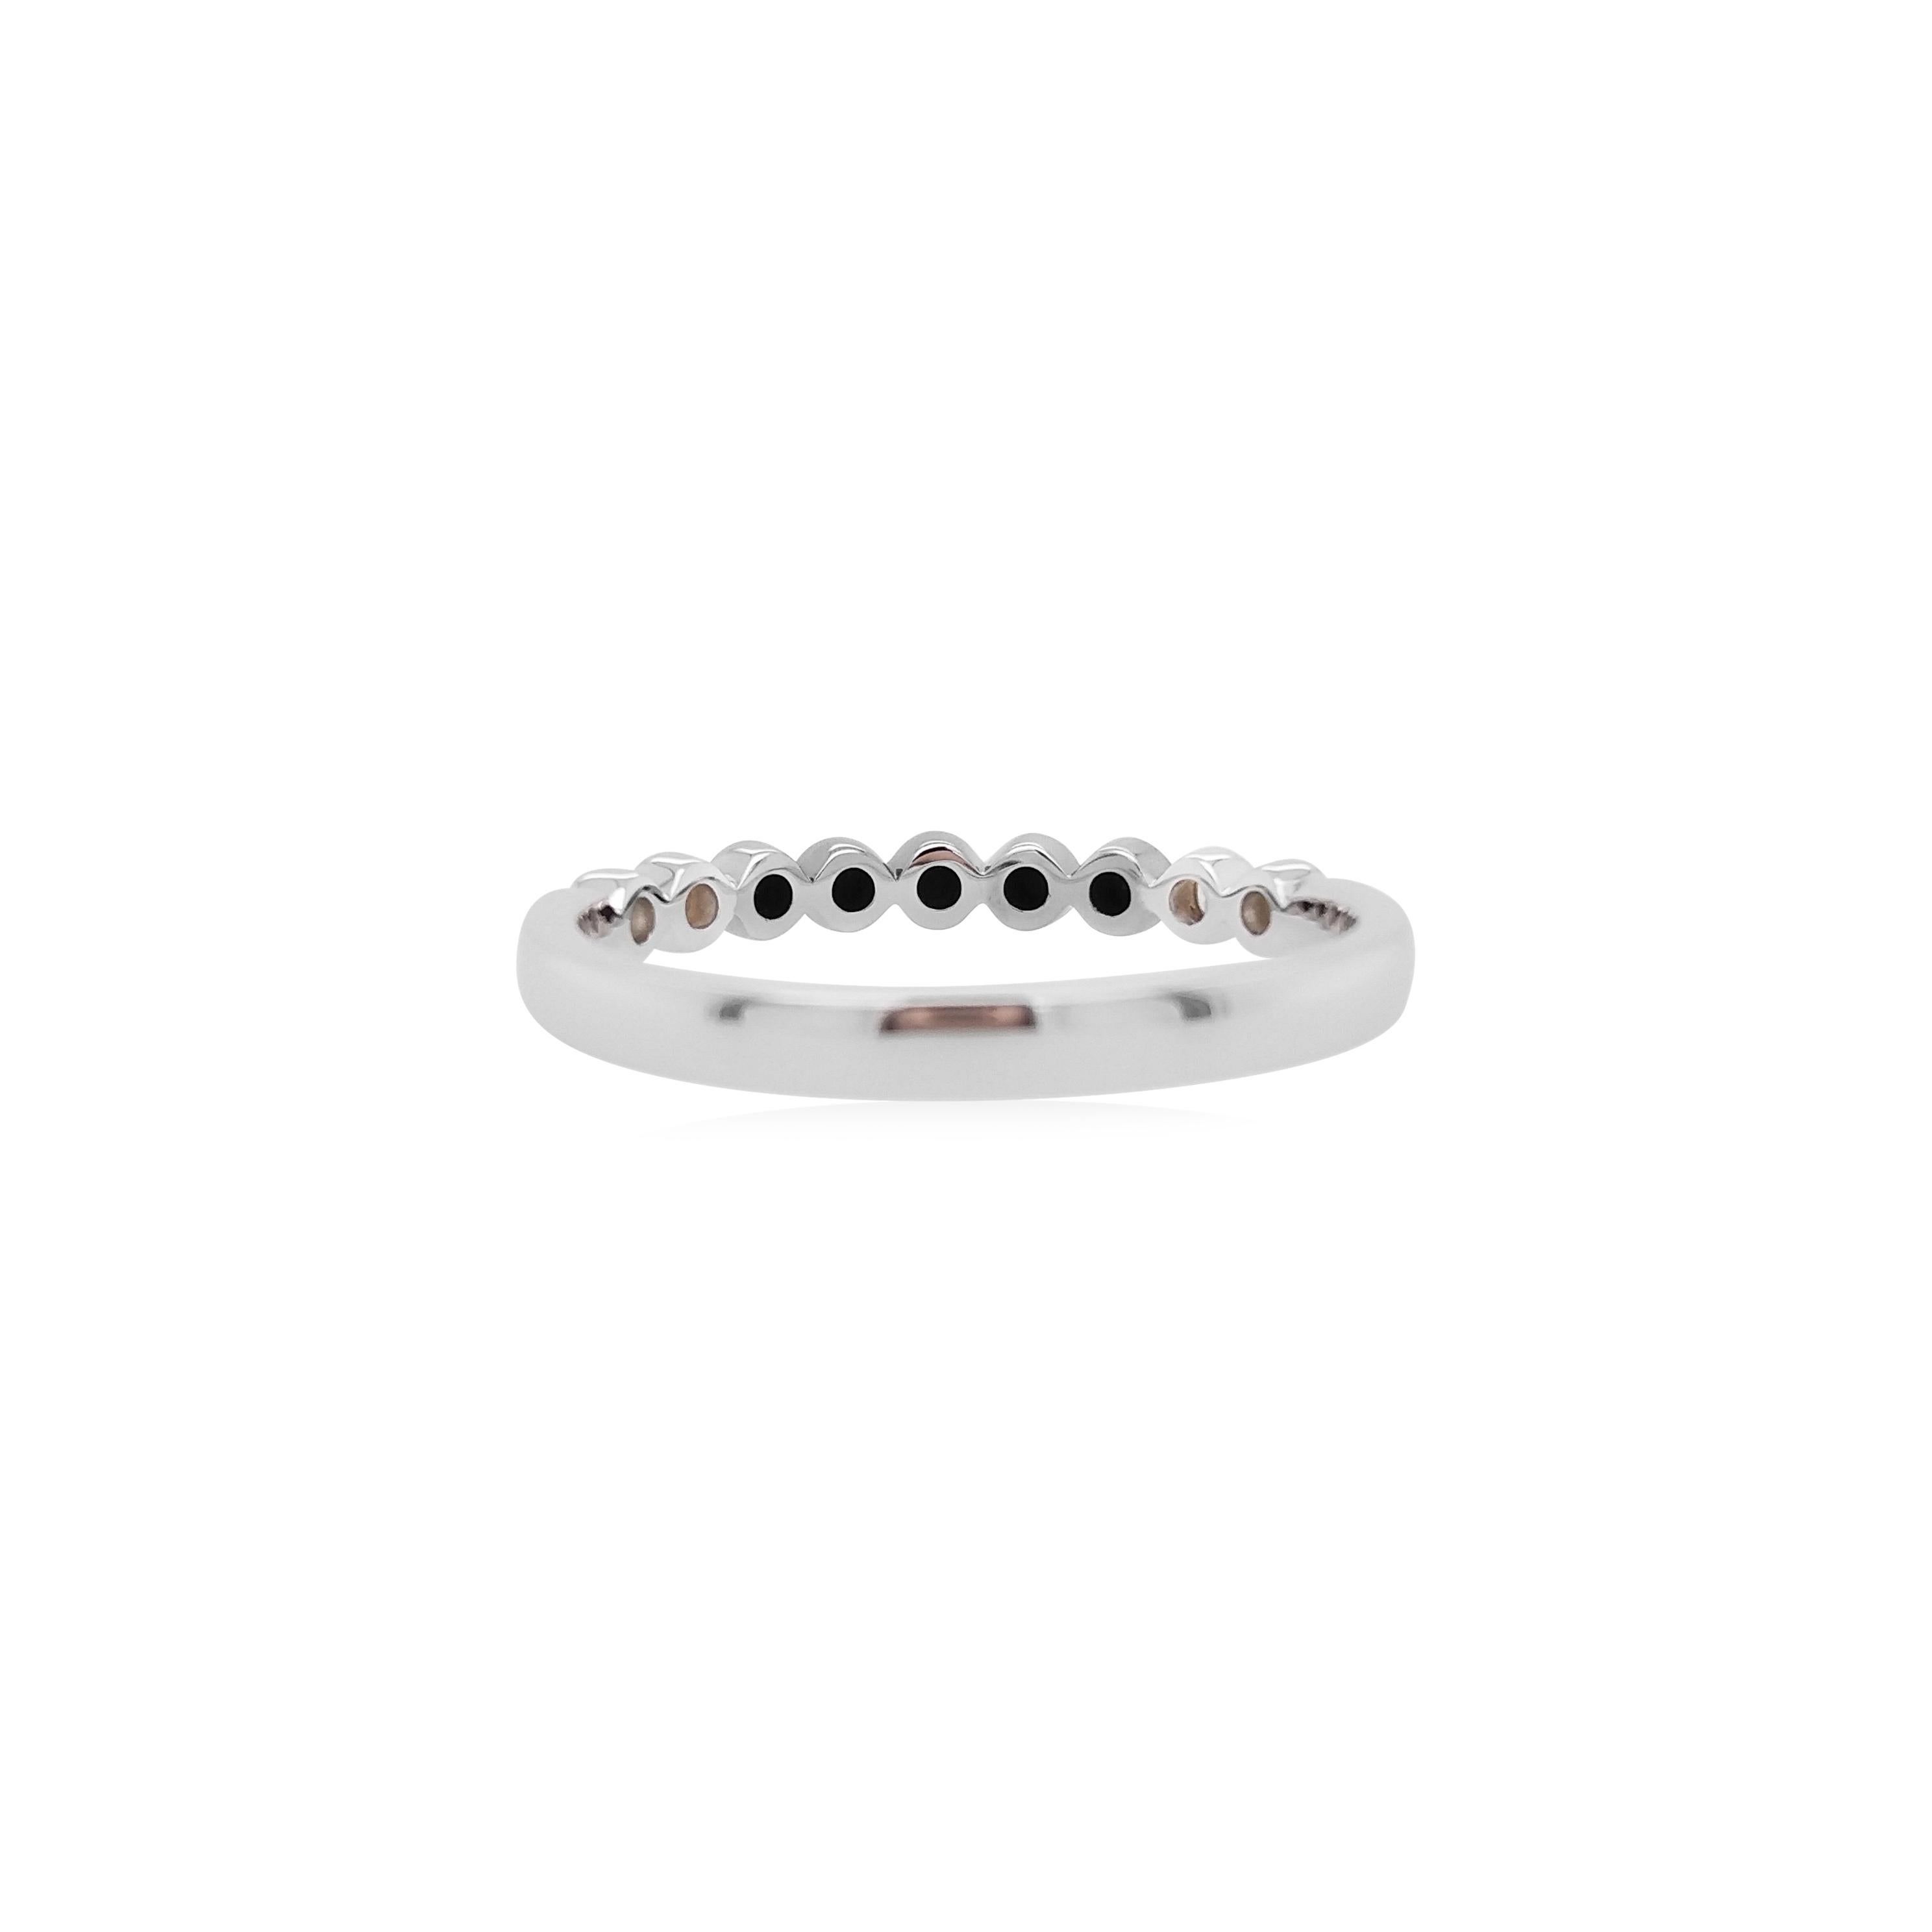 Contemporary Band Ring with Black Diamonds and White Diamonds made in 18K Gold For Sale